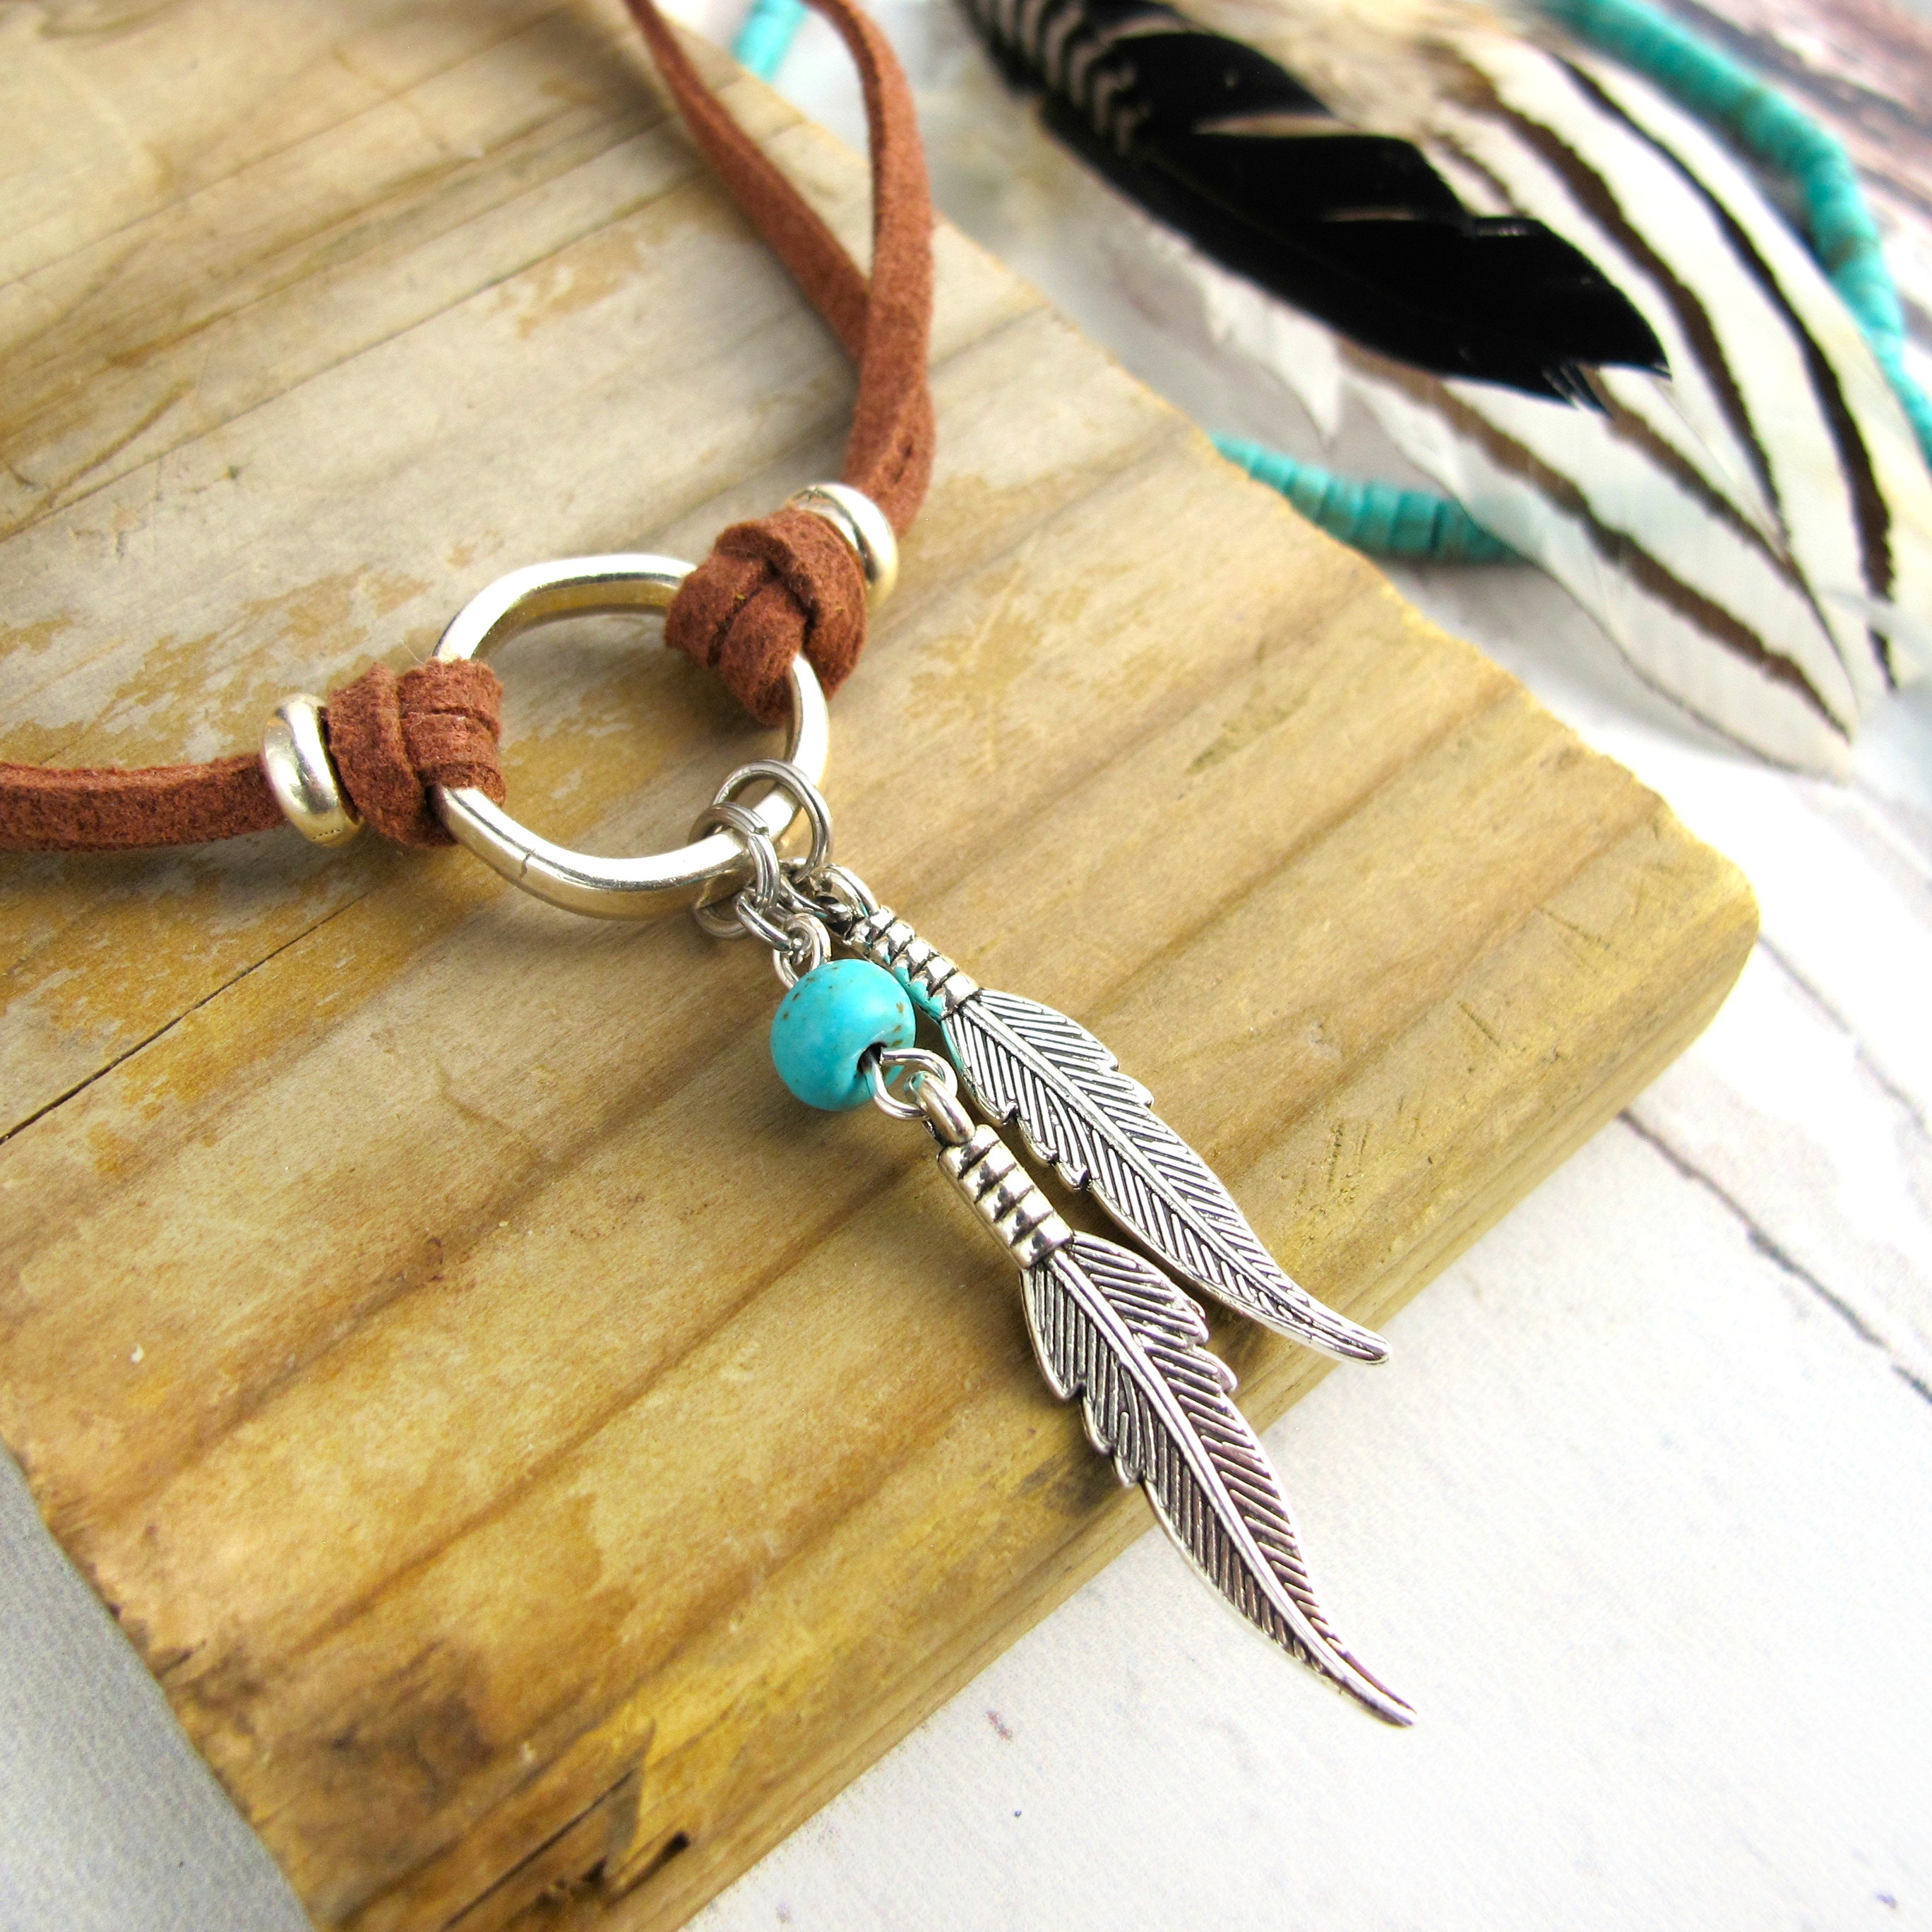 Dropship 6 PCS Suede Leather Chokers For Women Boho Necklaces Chokers  Feather Turquoise Adjustable Handmade Necklaces Boho Choker Native American  For Women to Sell Online at a Lower Price